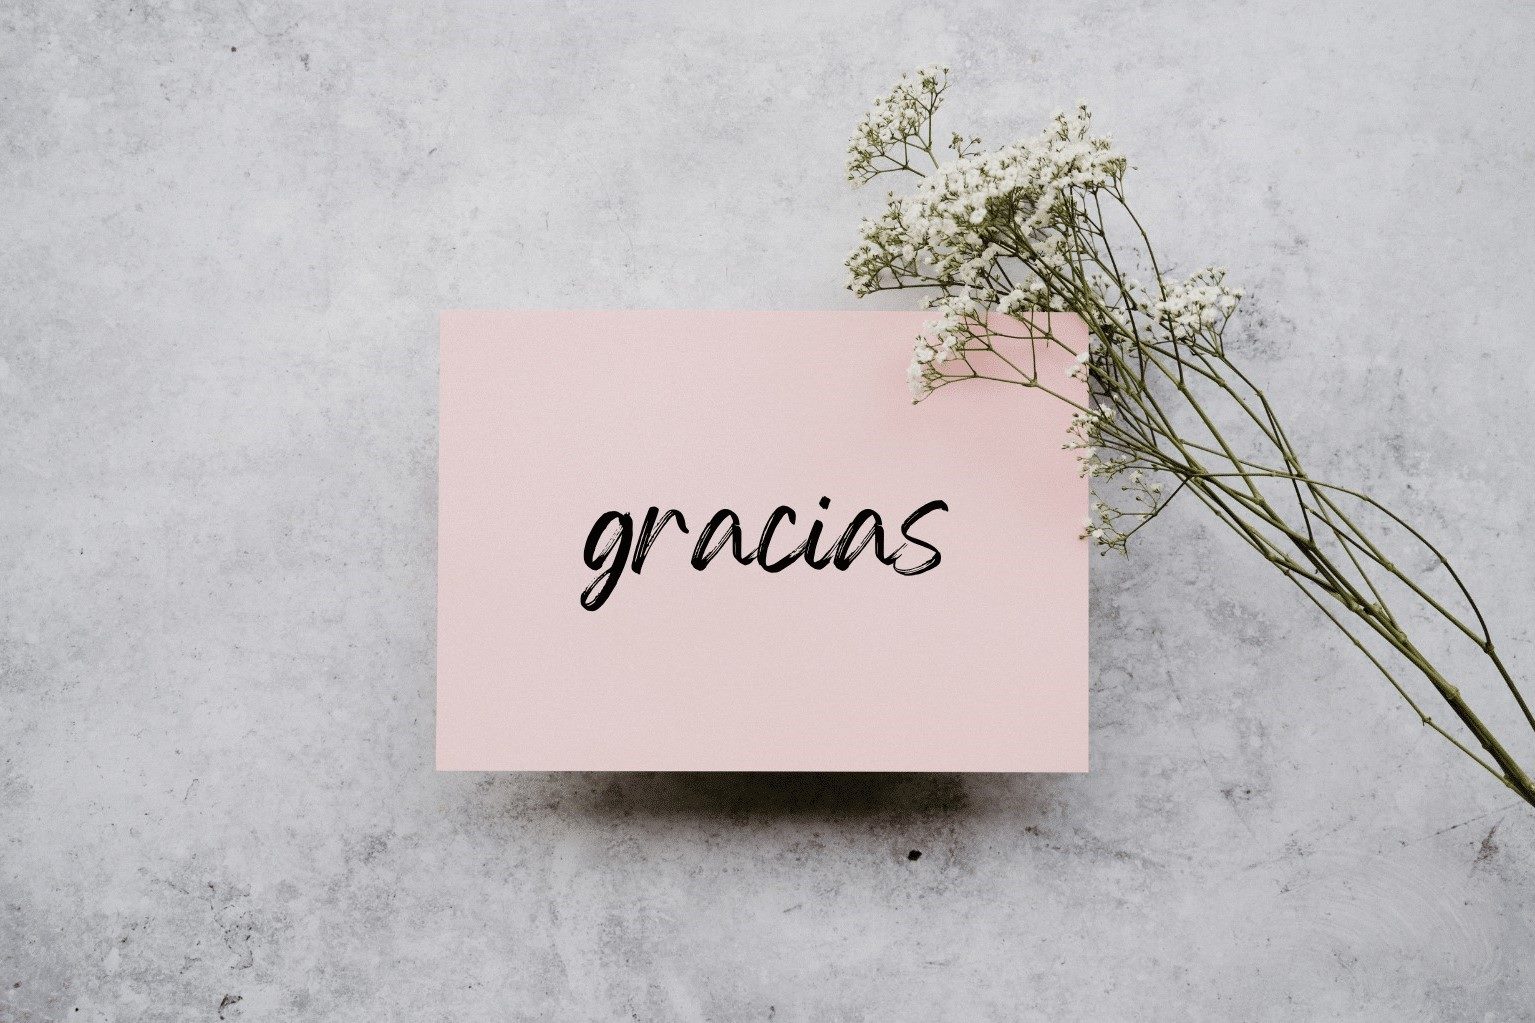 The Correct Way To Say ‘Thank You’ In Spanish